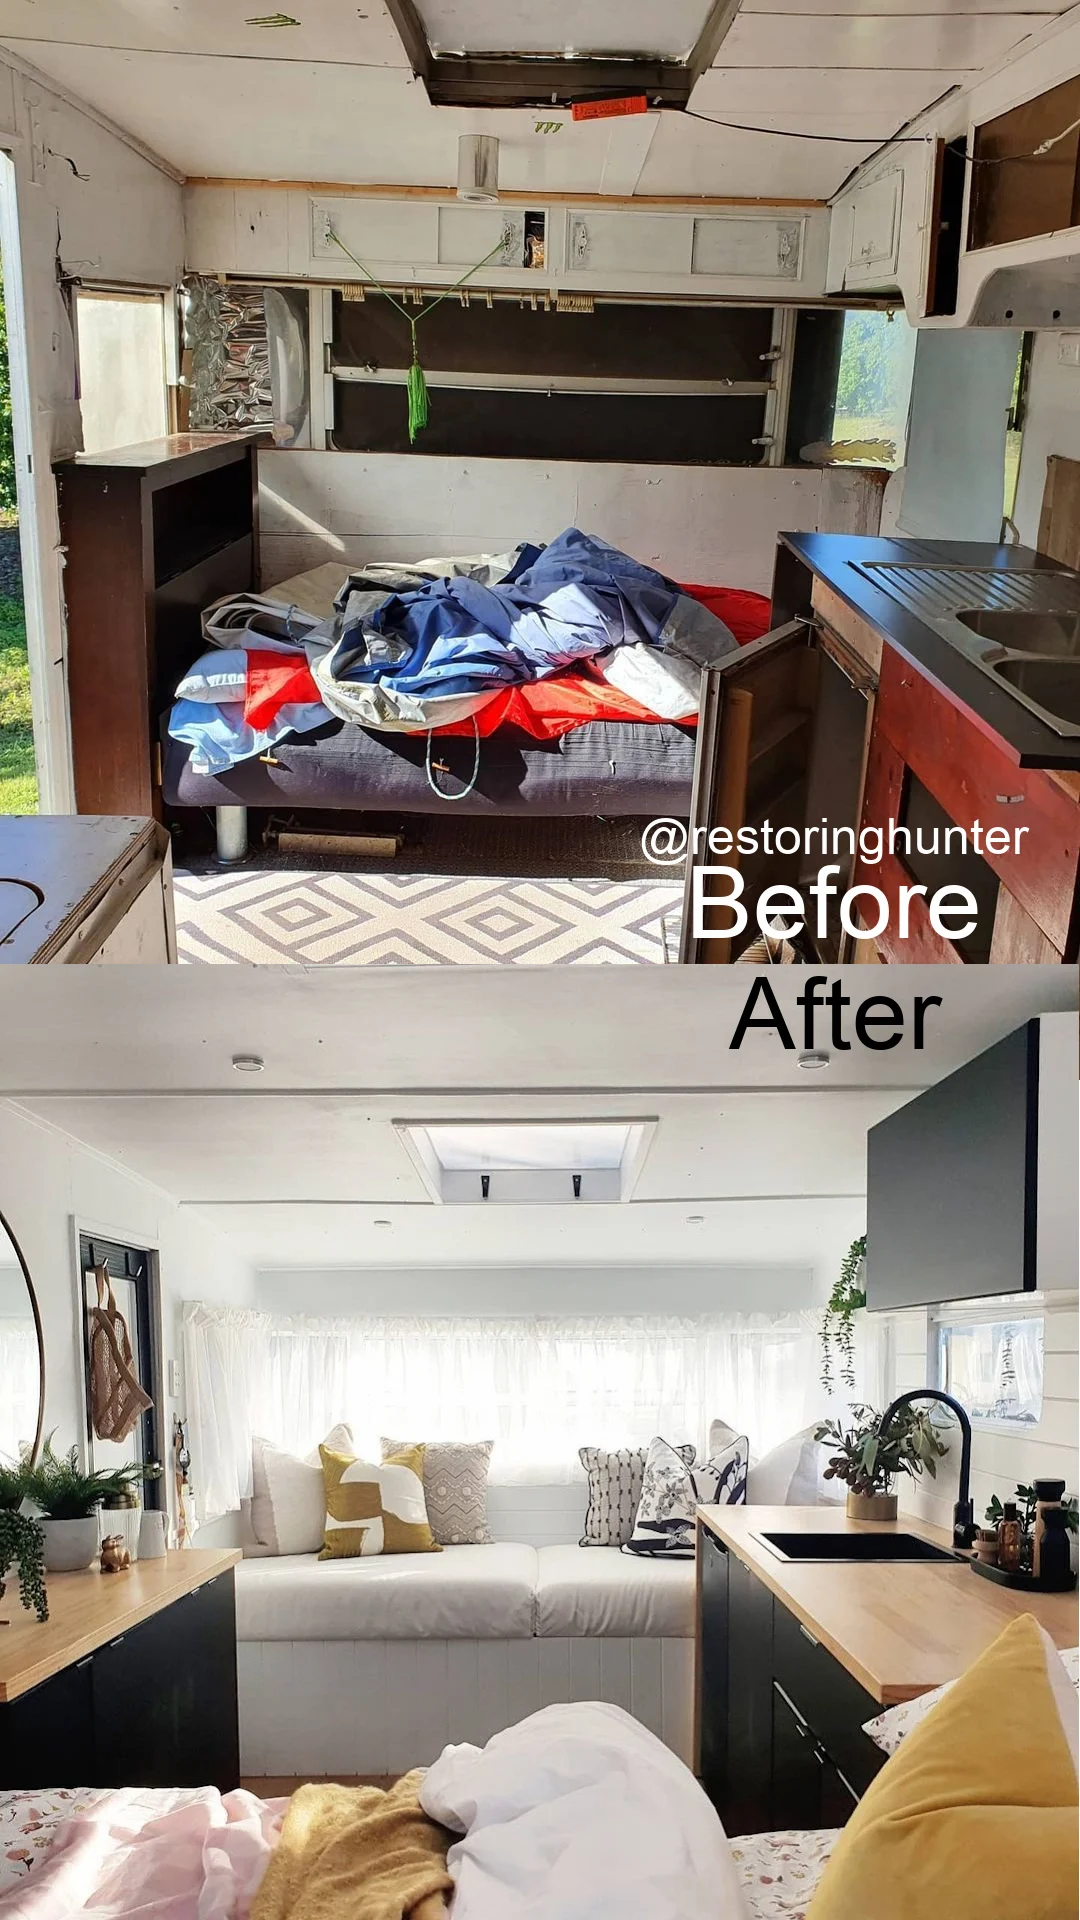 Before and after photos of the interior of a renovated vintage camper.